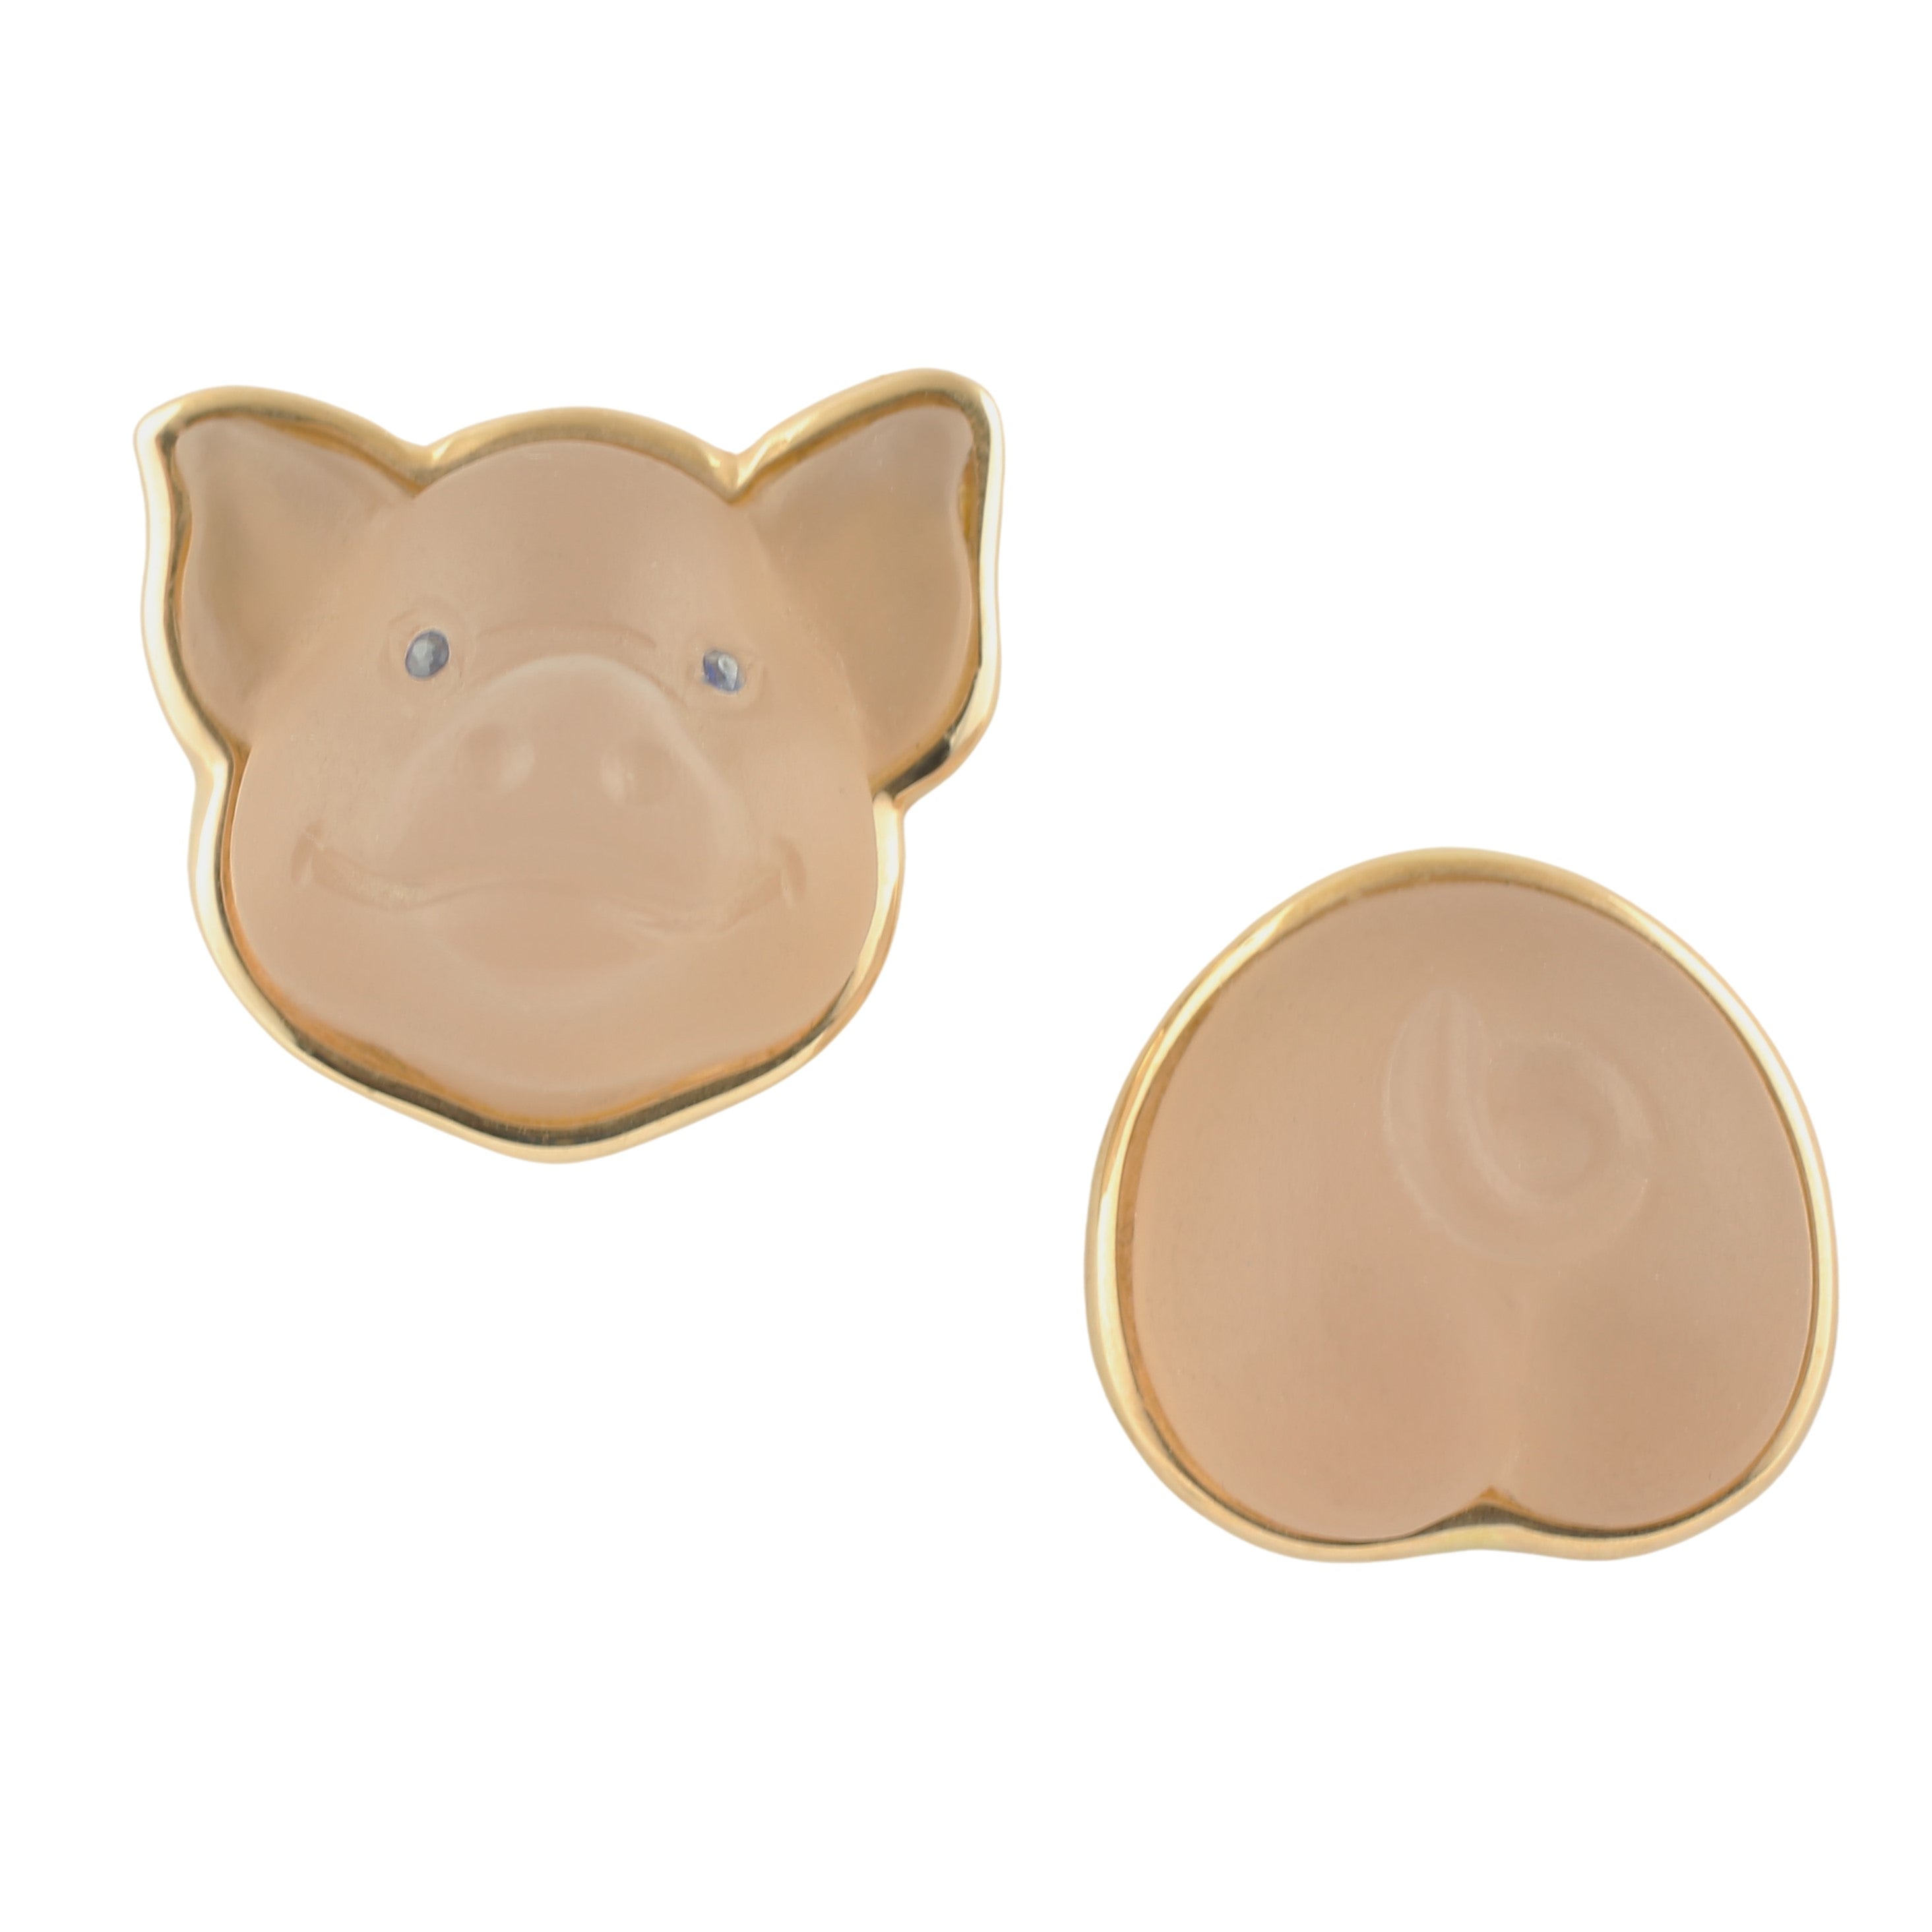 cheeky chubby pig rose quartx with sapphire eyes 18ct rose gold cufflinks - front and rear